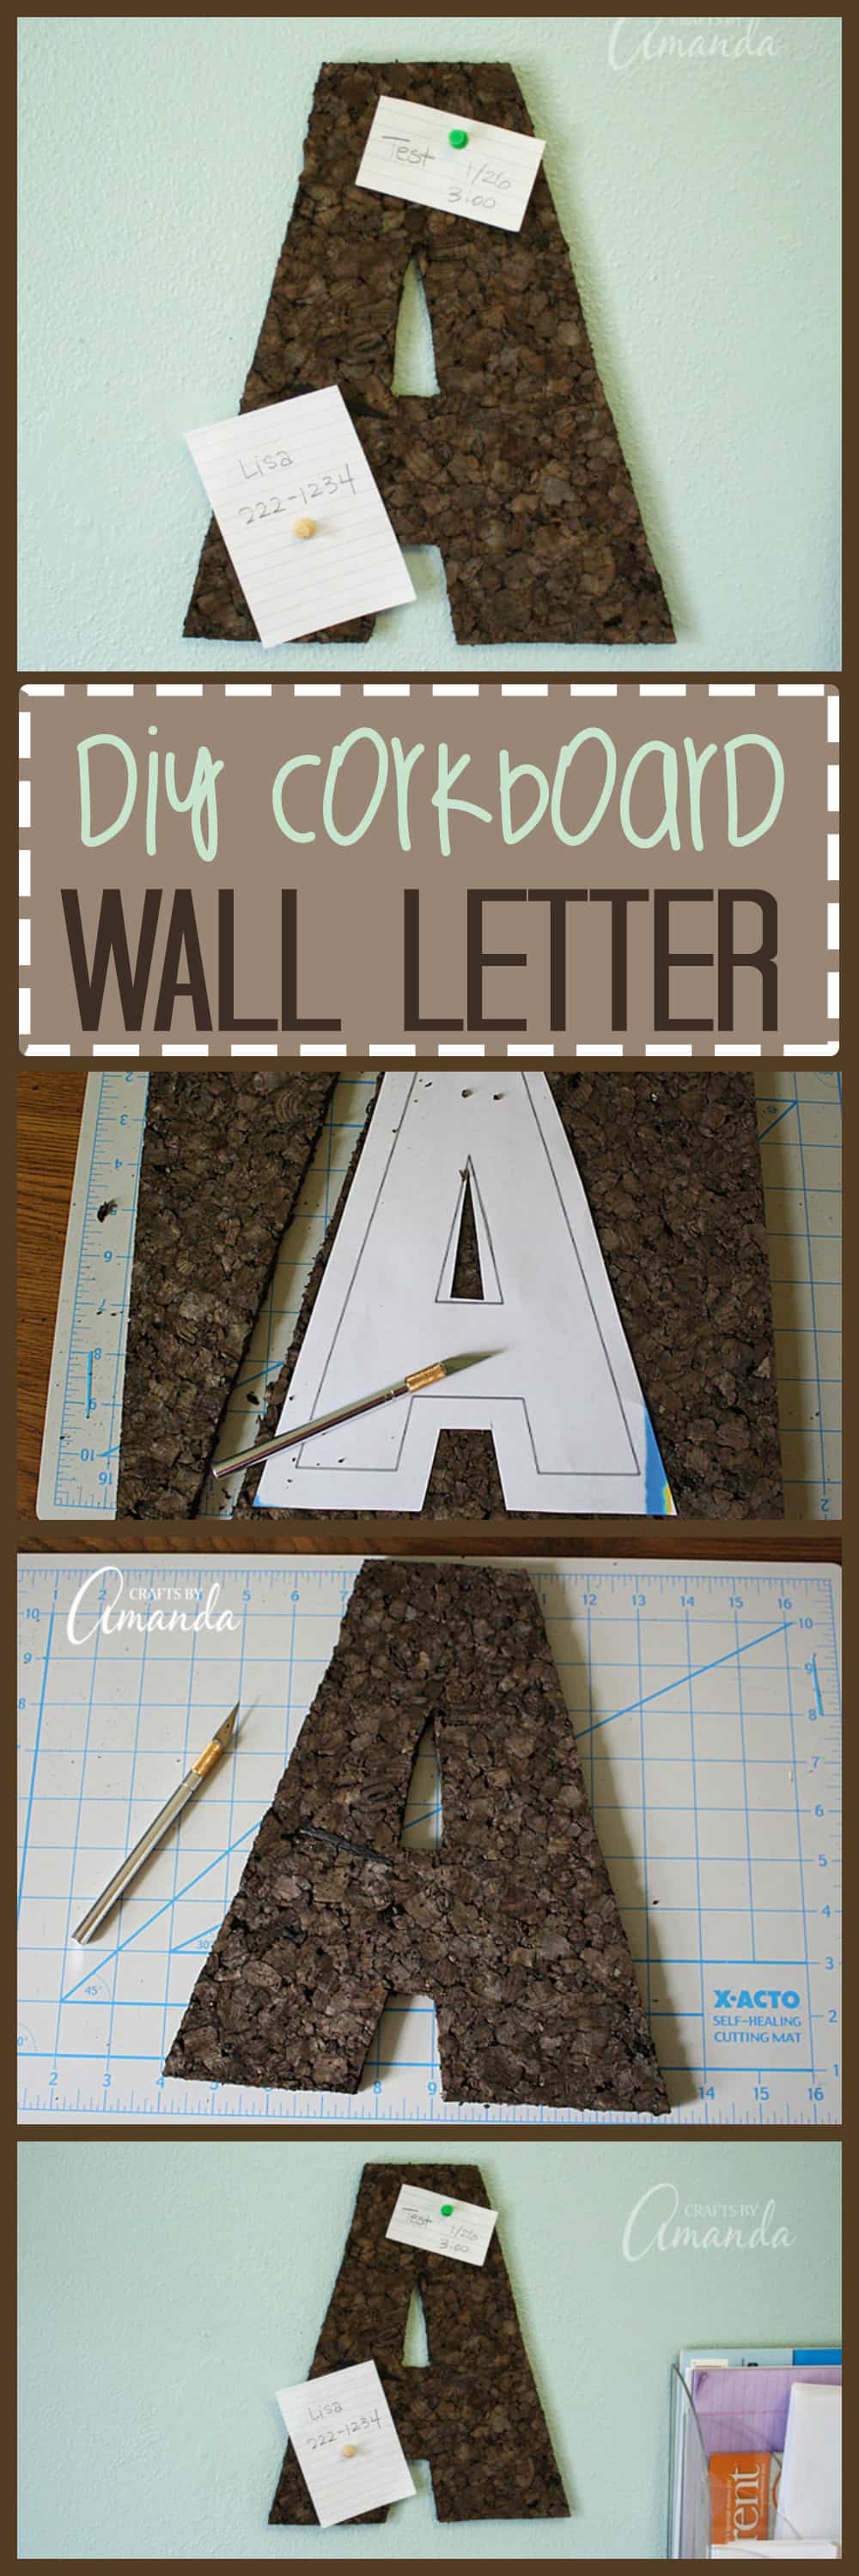 This corkboard wall letter is perfect for a teen's bedroom or a dorm room. This corkboard craft is really easy to make and very inexpensive.